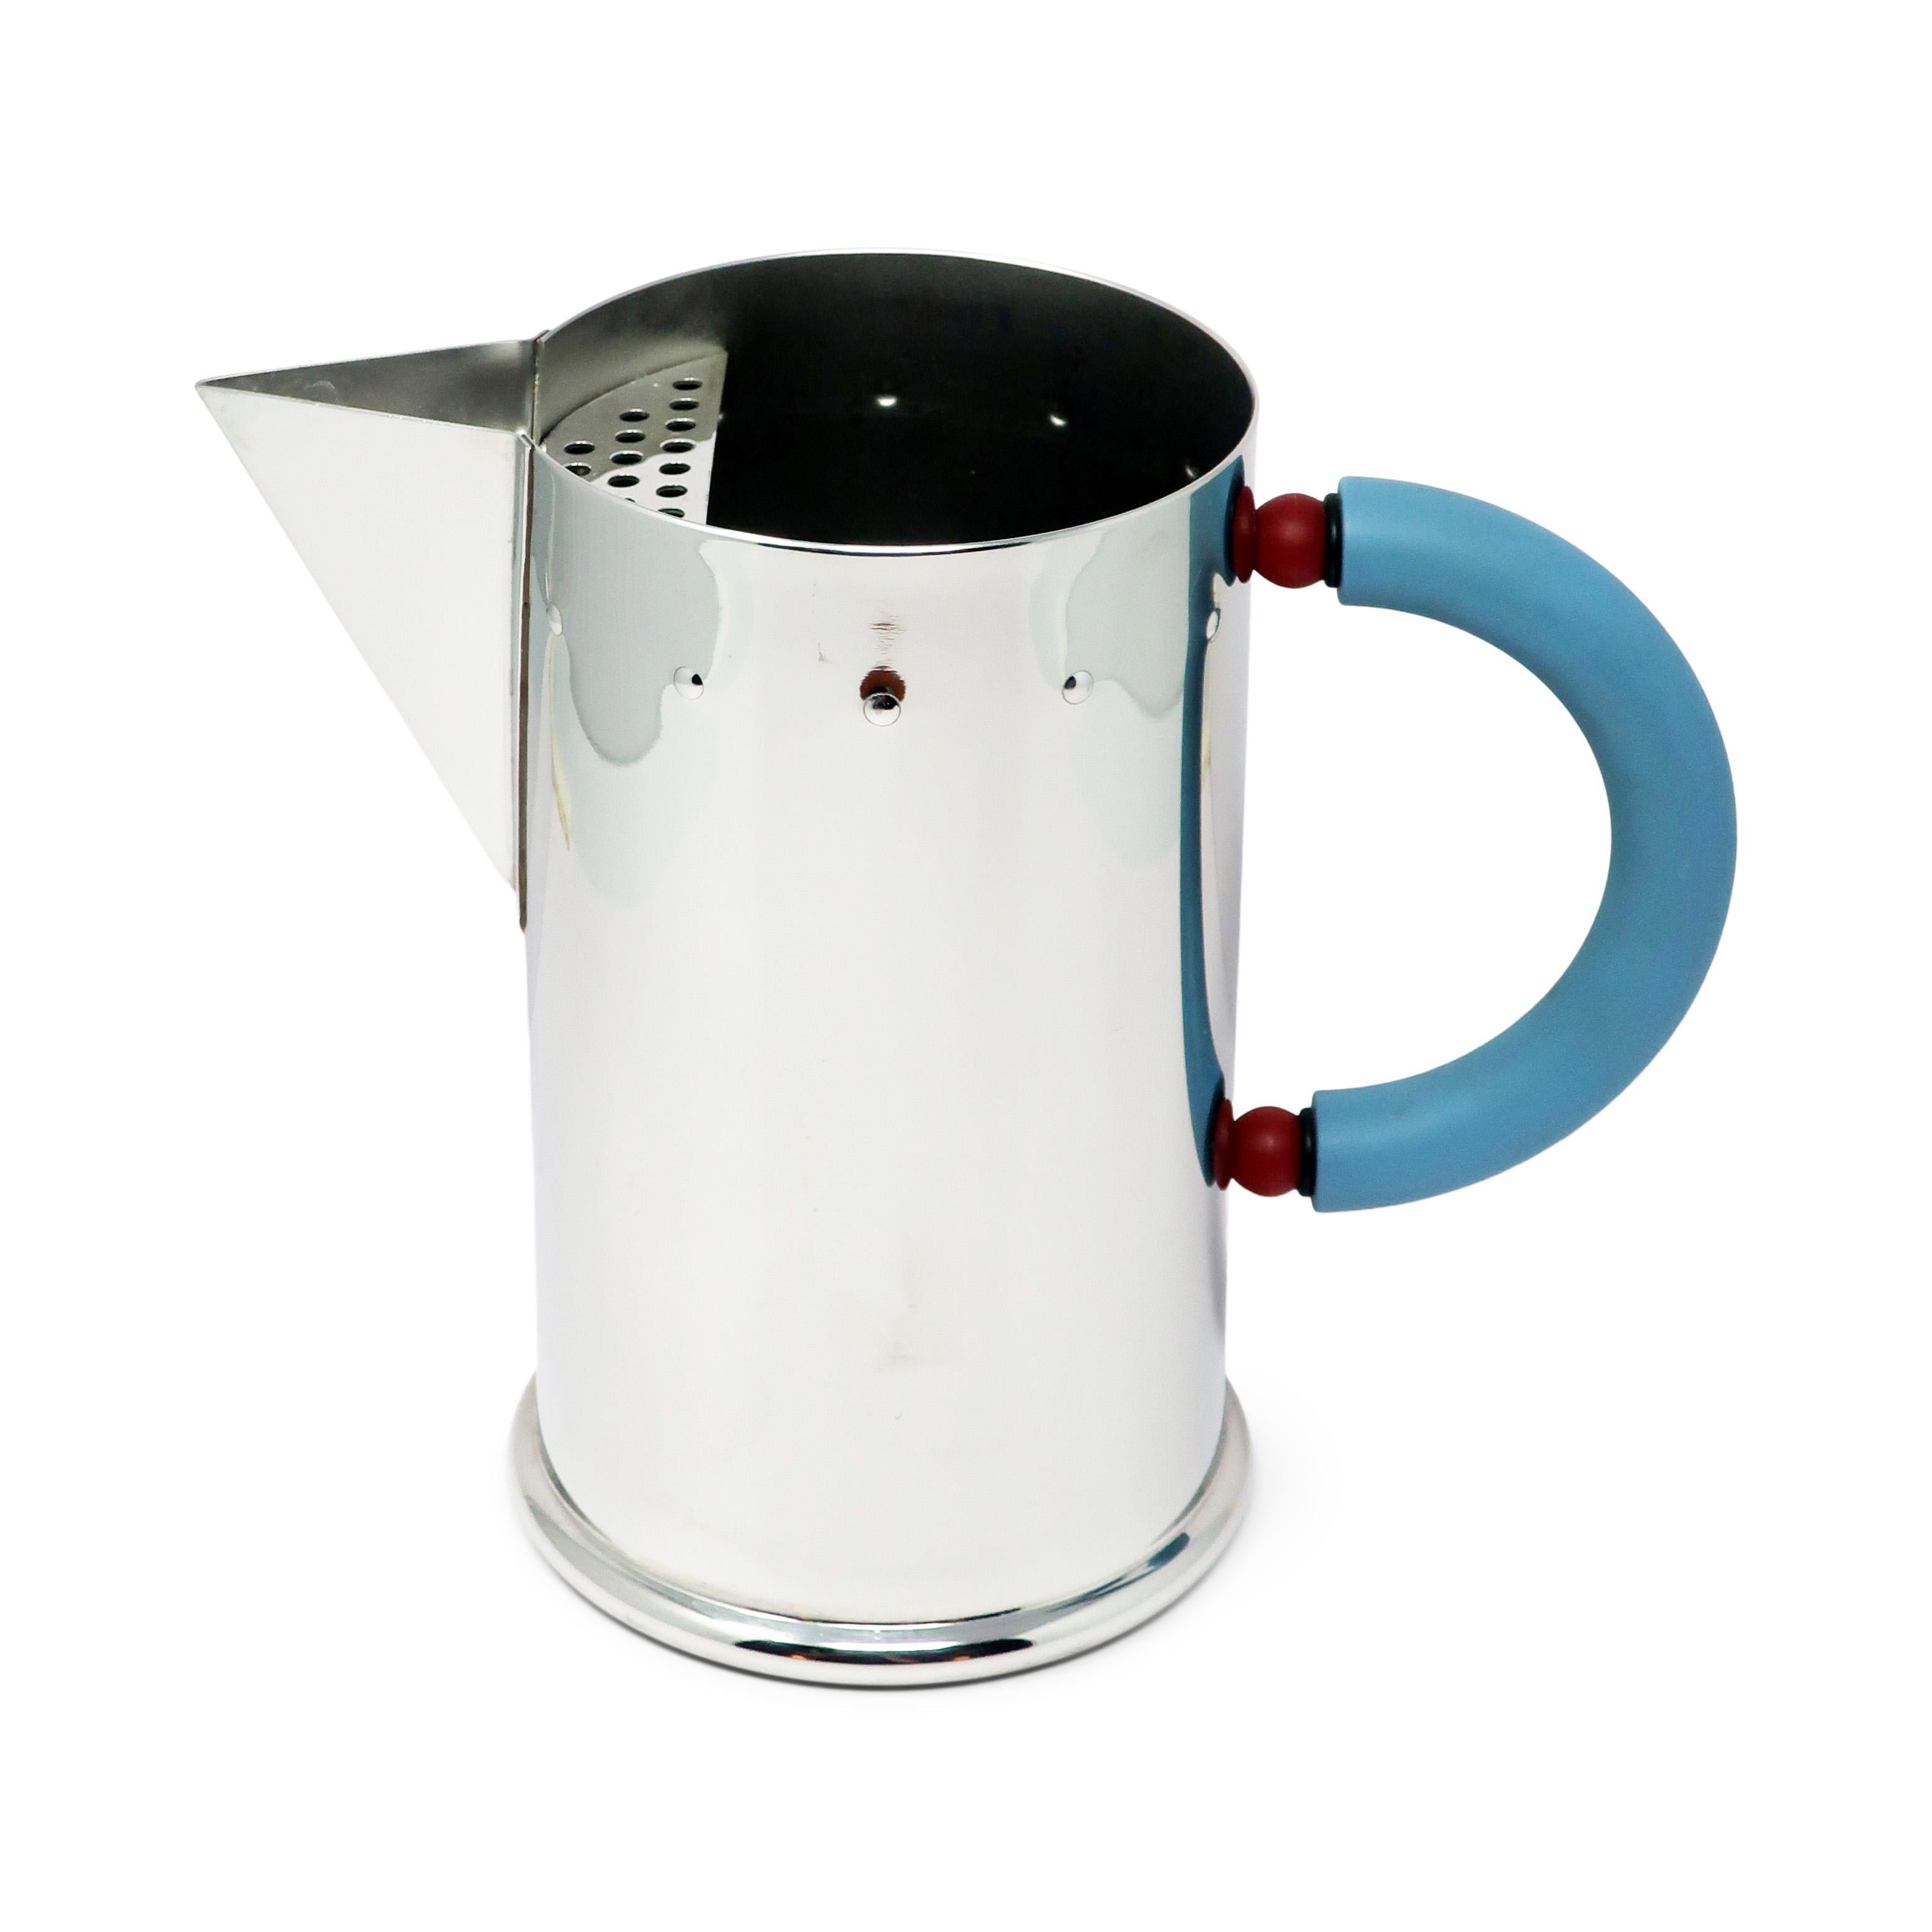 Stainless Steel Stainless Pitcher, Creamer and Sugar by Michael Graves for Alessi